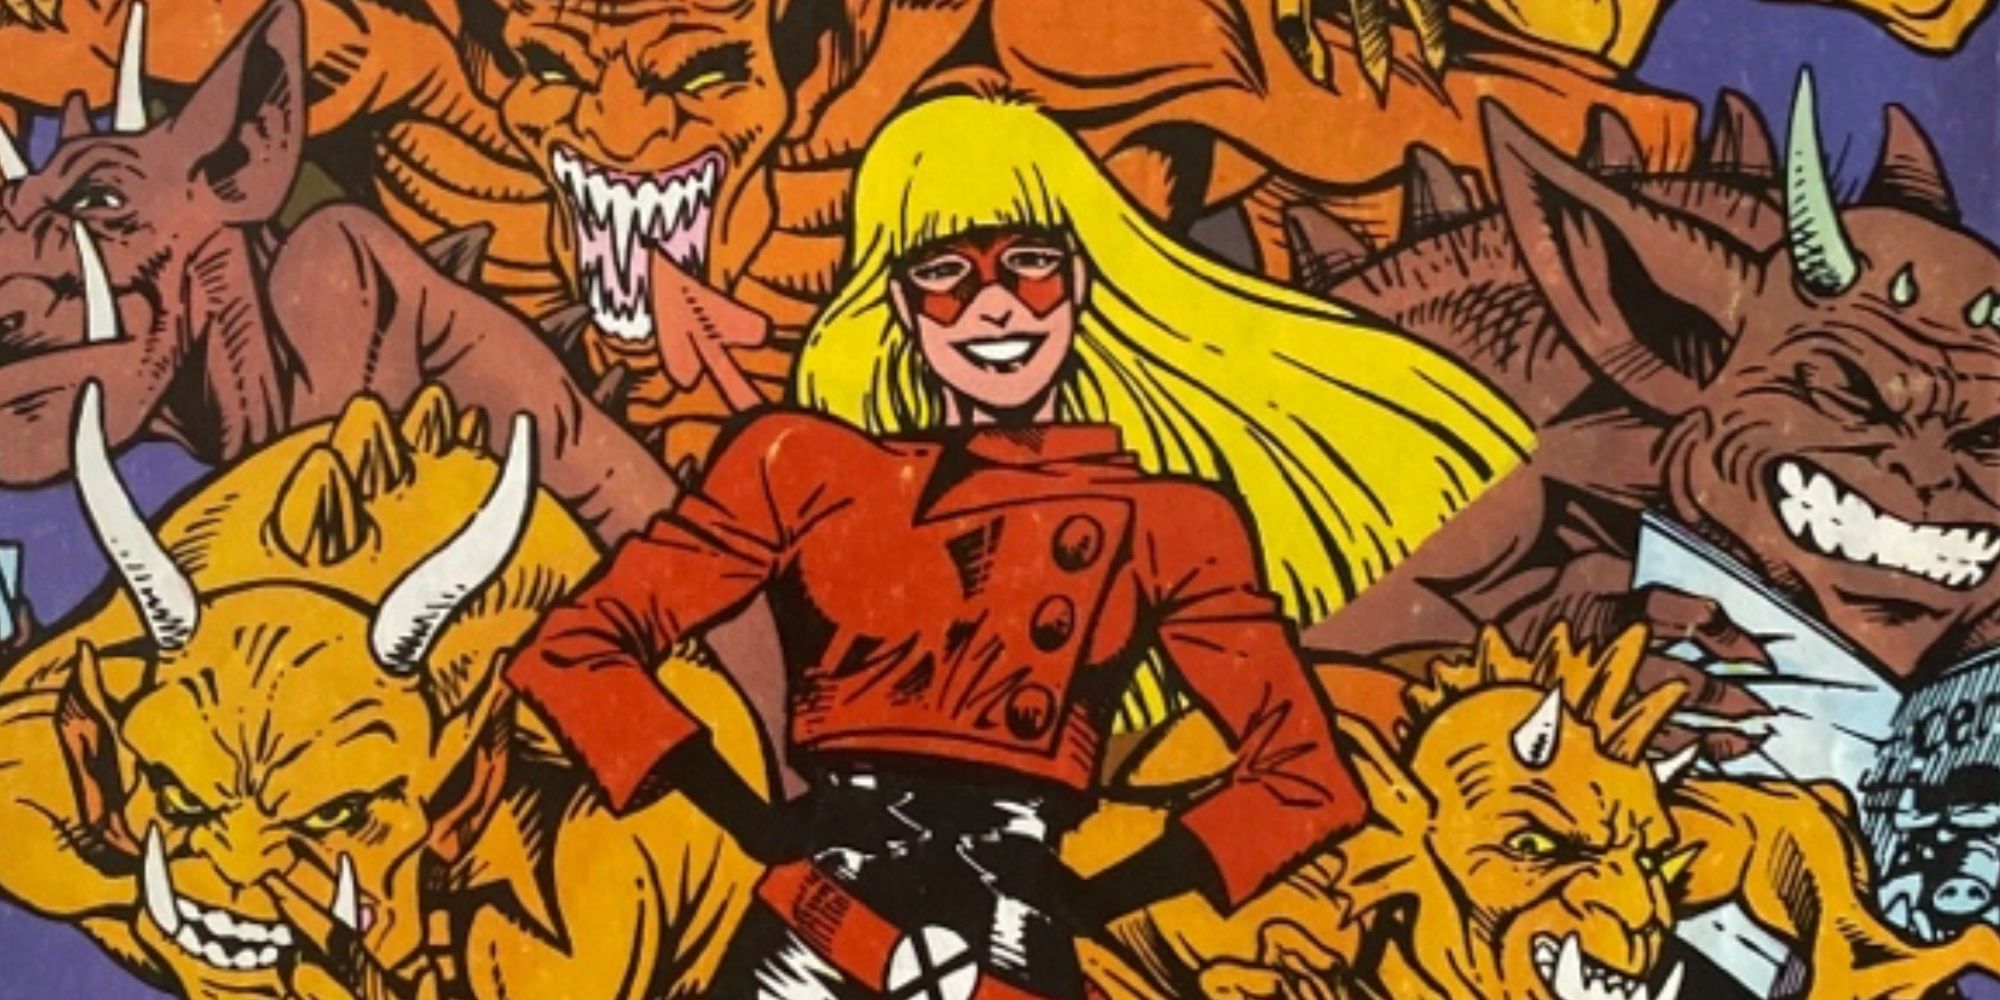 Magik appears with Limbo demons in Los Nuevos Mutantes comics by Carlos Pacheco.